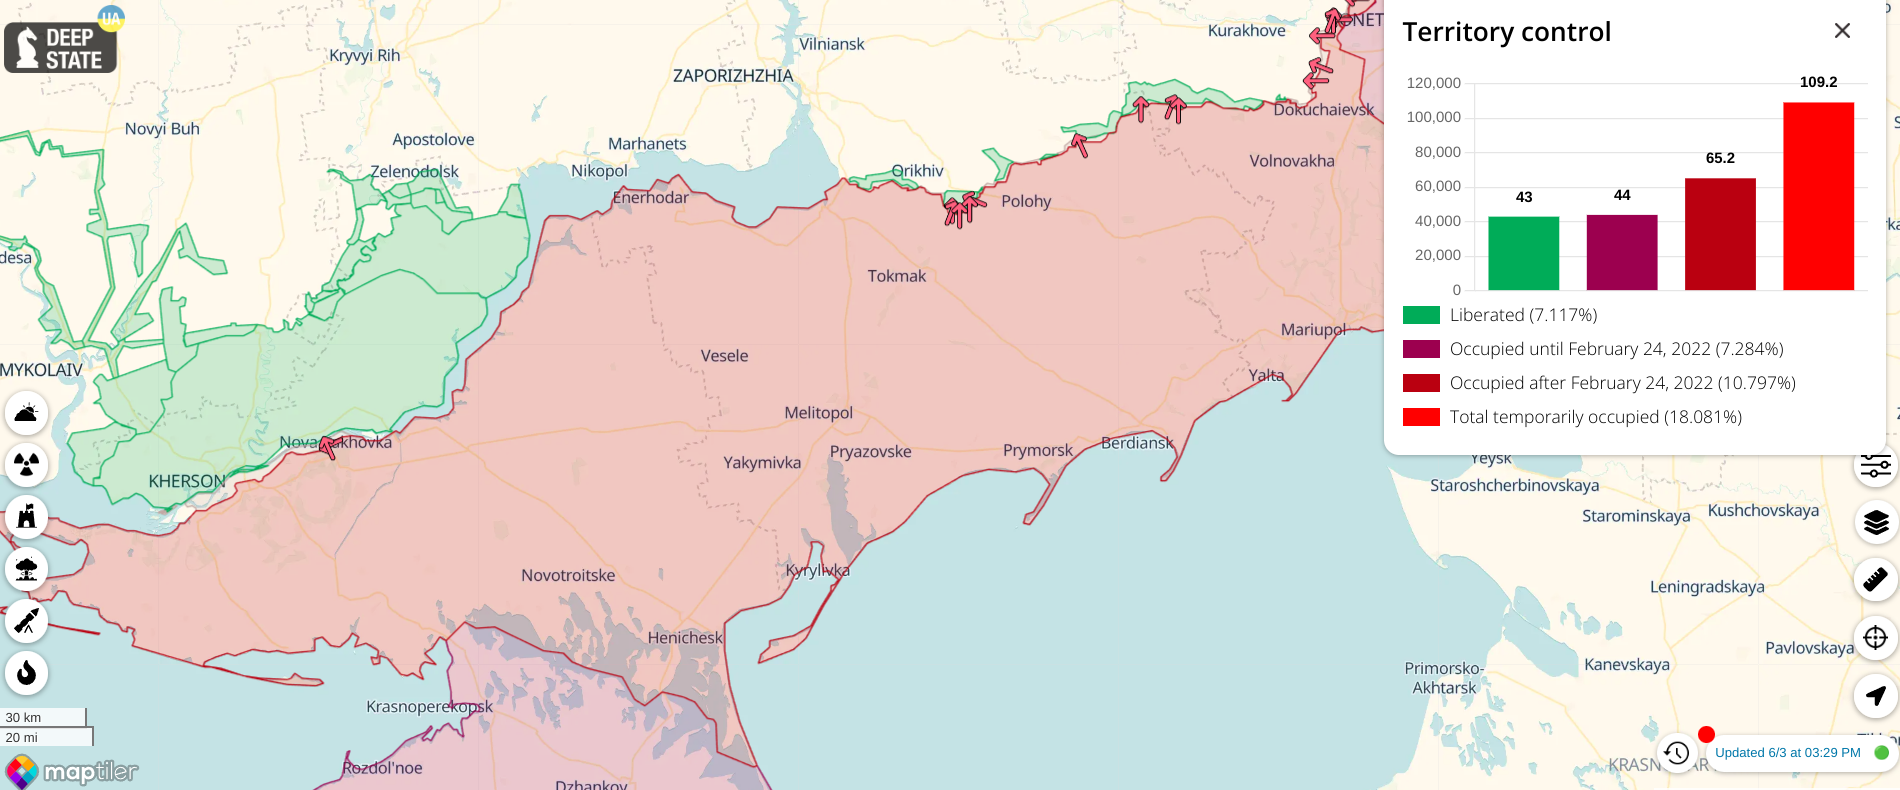 The current state of the southern front line in Ukraine